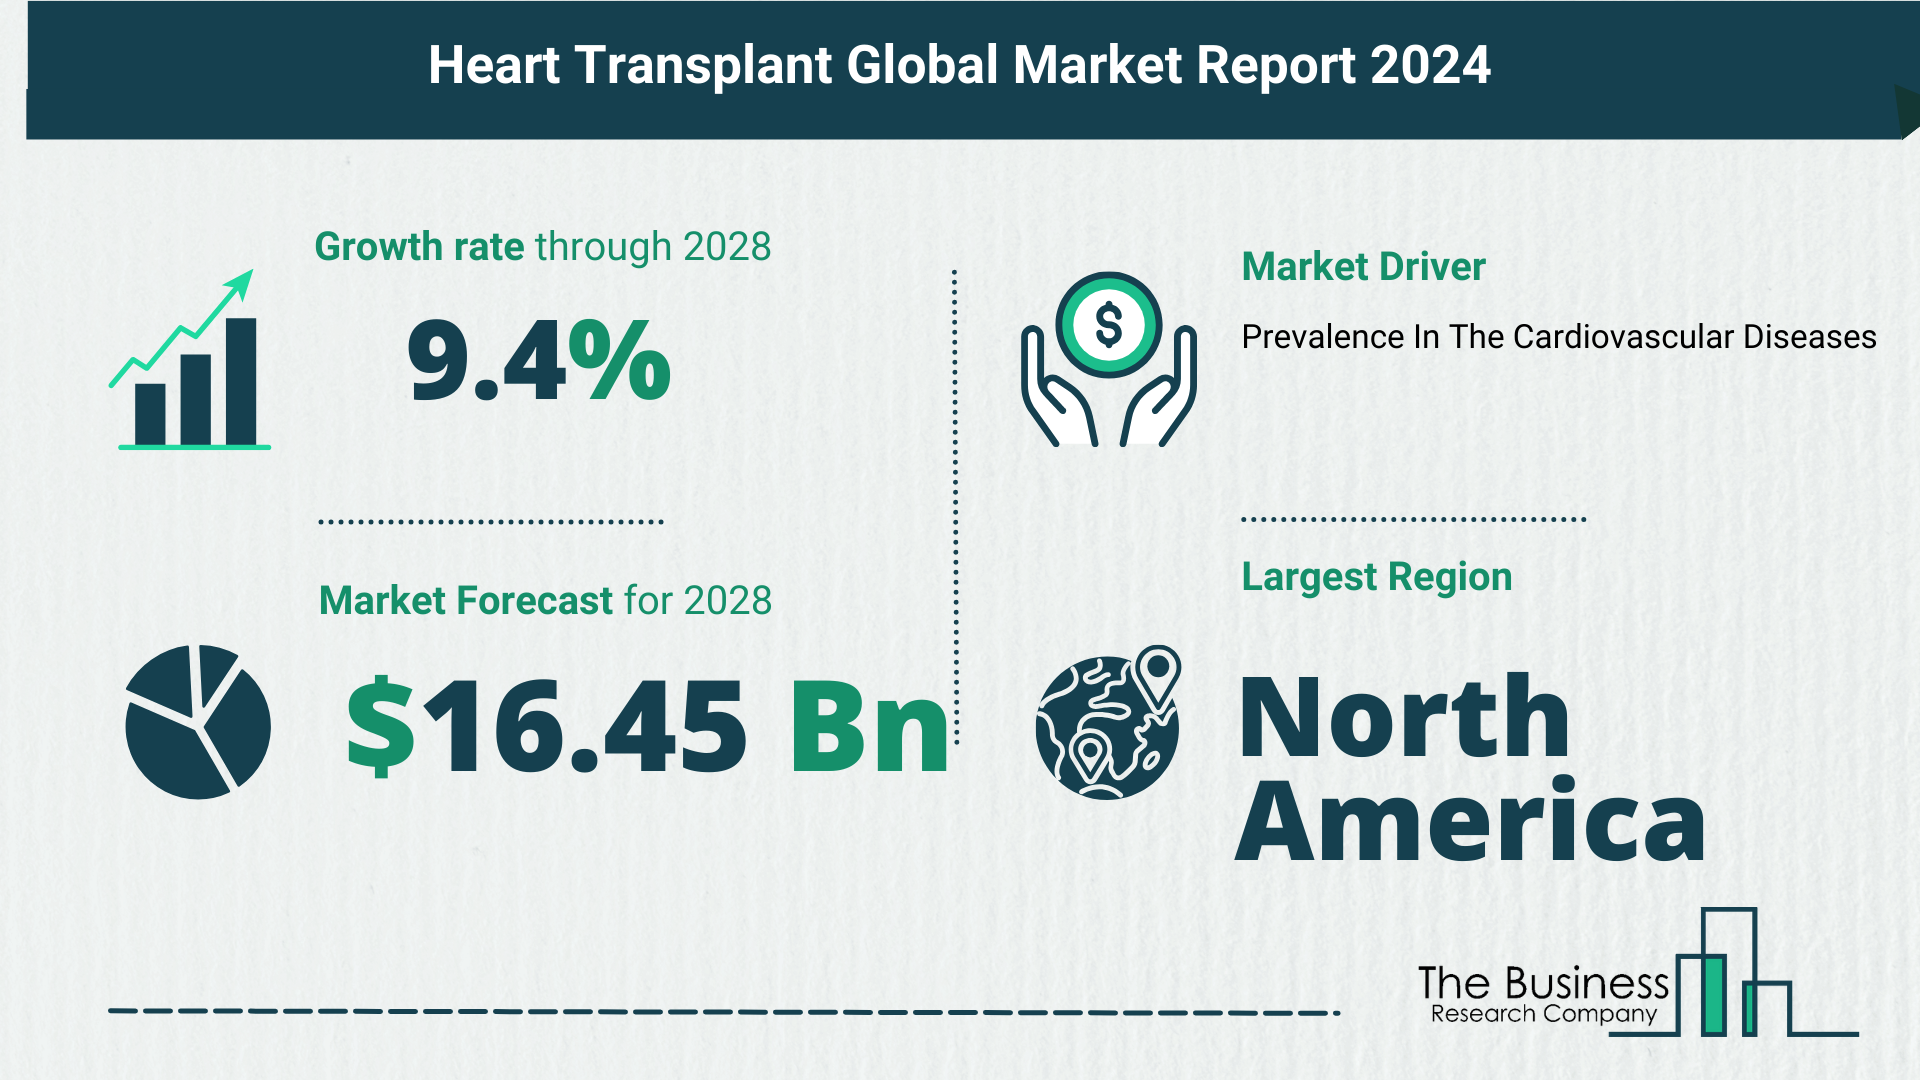 Global Heart Transplant Market Overview 2024: Size, Drivers, And Trends